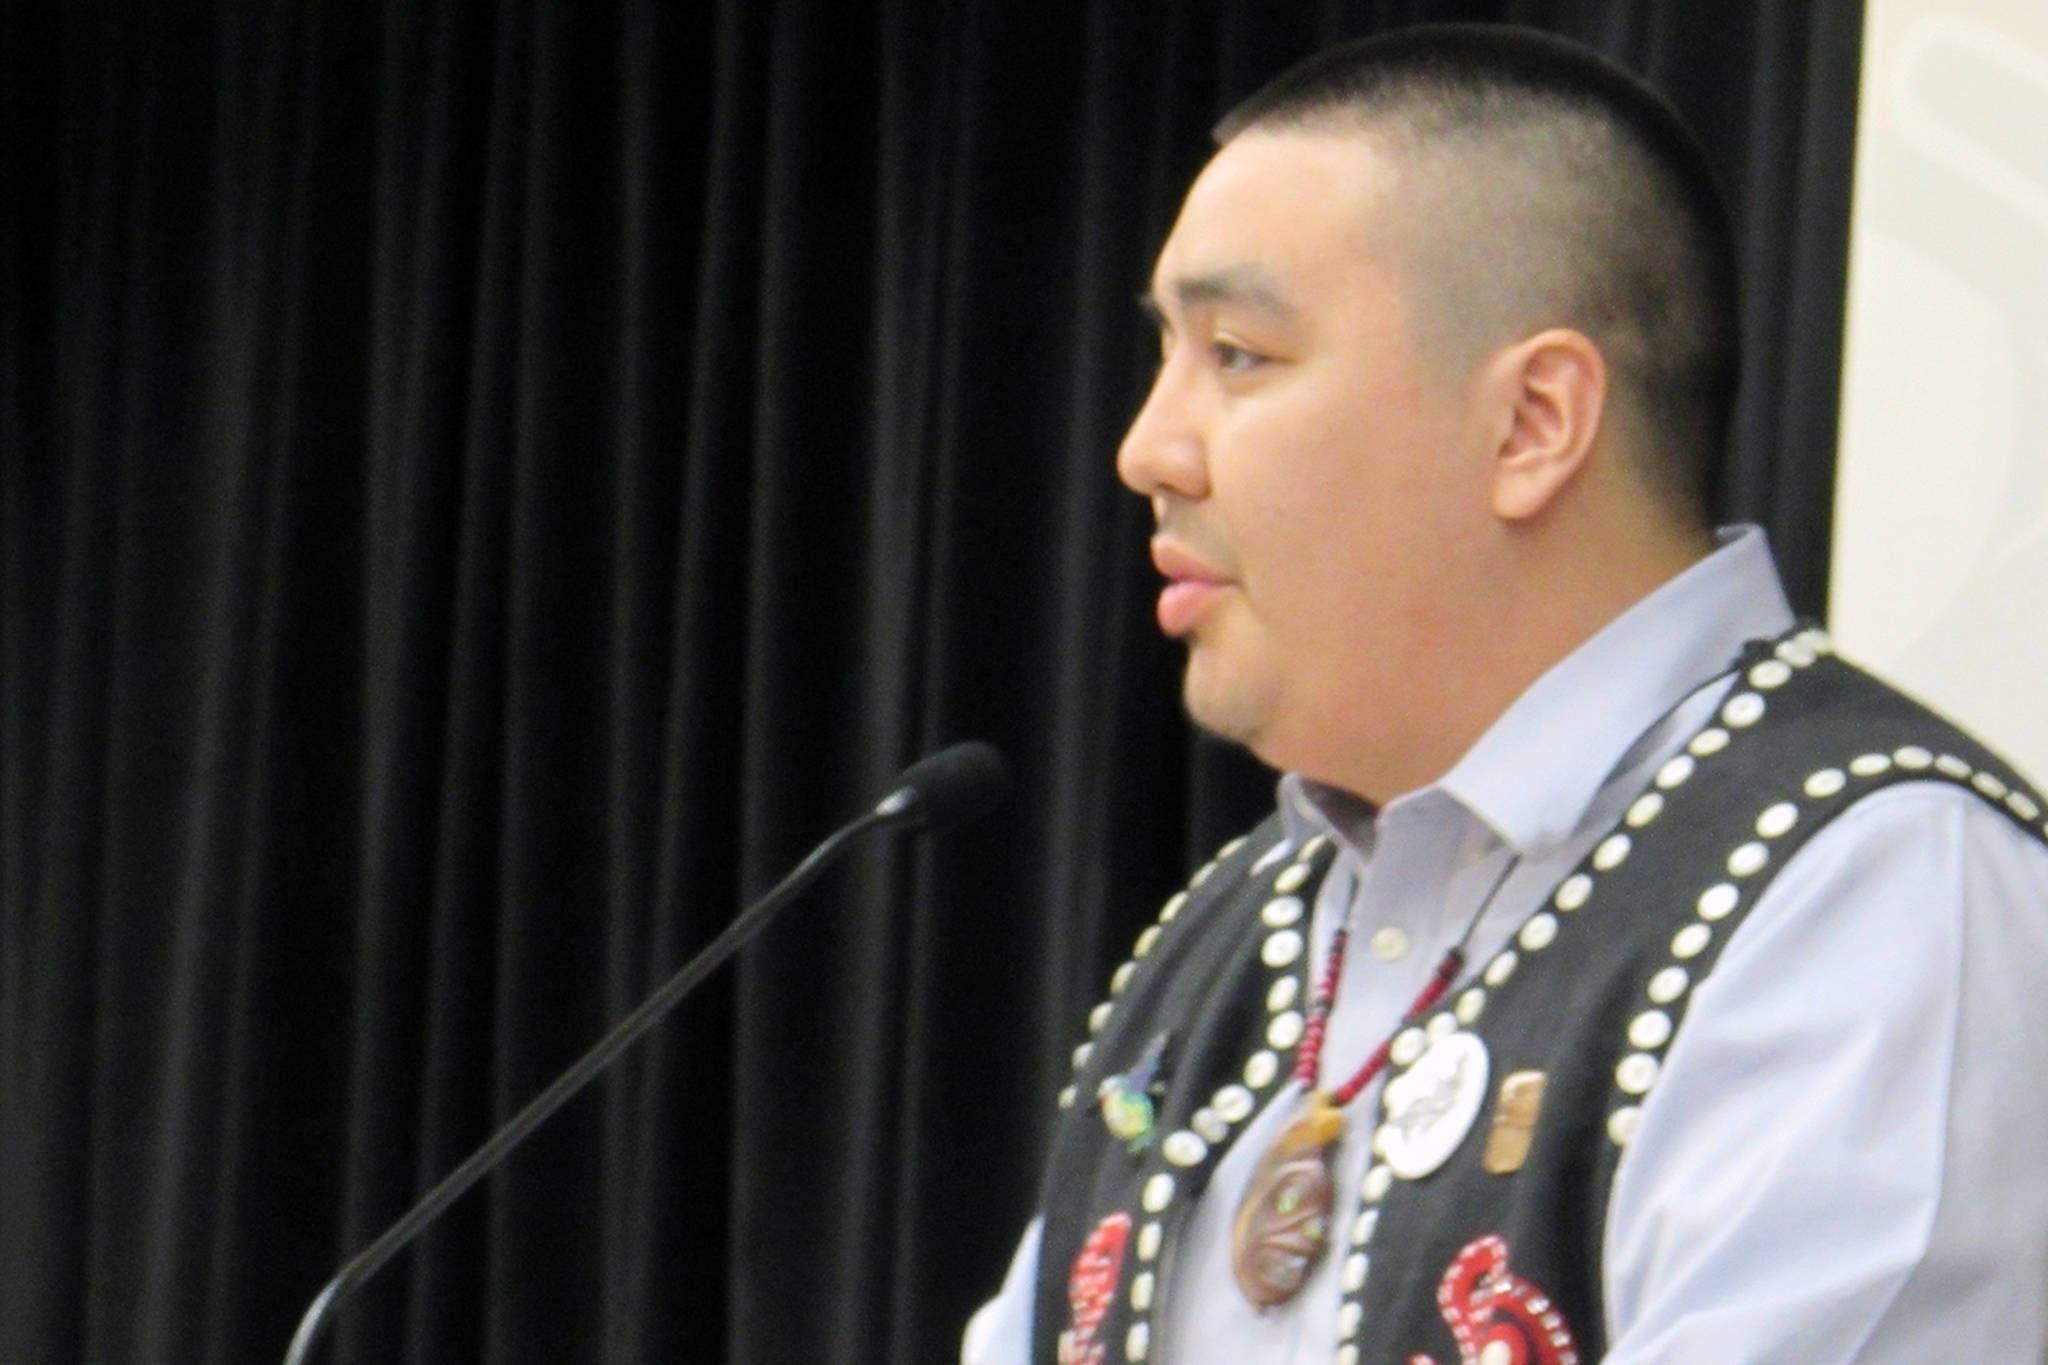 Shawaan Jackson-Gamble gives a short speech after being elected emerging leader during the last day of Central Council of Tlingit and Haida Indian Tribes of Alaska’s 84th annual Tribal Assembly, Friday, April 12, 2019. (Ben Hohenstatt | Juneau Empire)